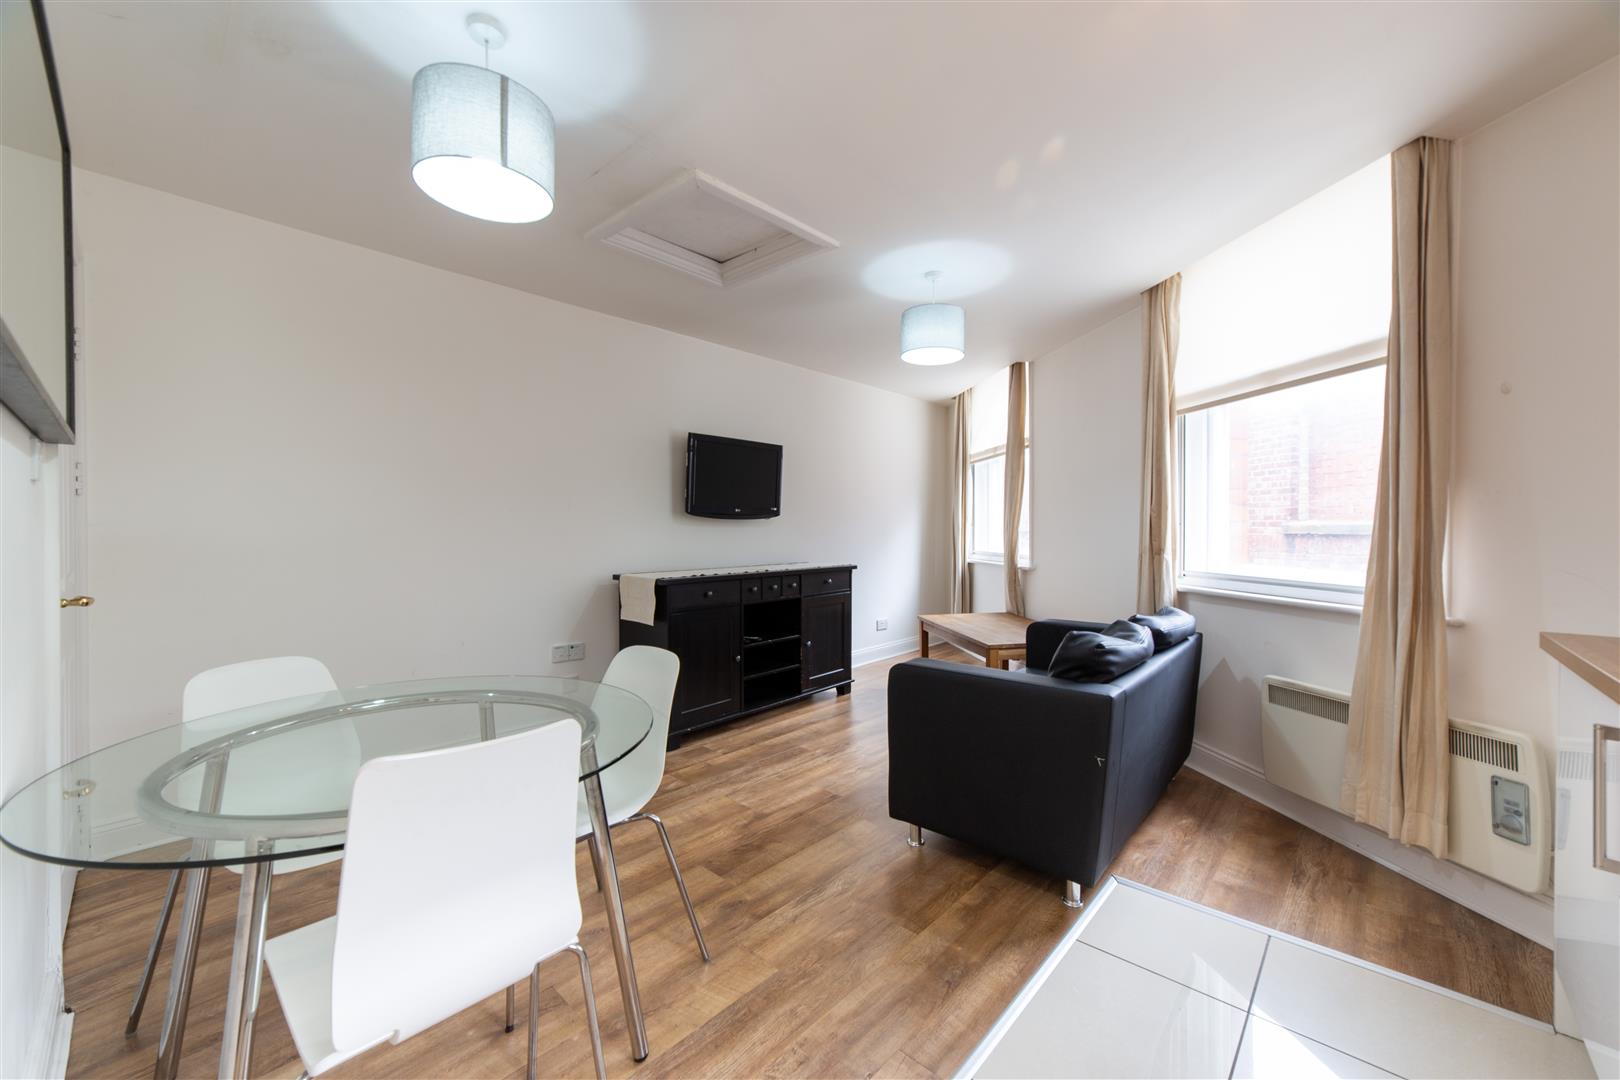 1 bed apartment to rent in St Andrews Street, City Centre - Property Image 1